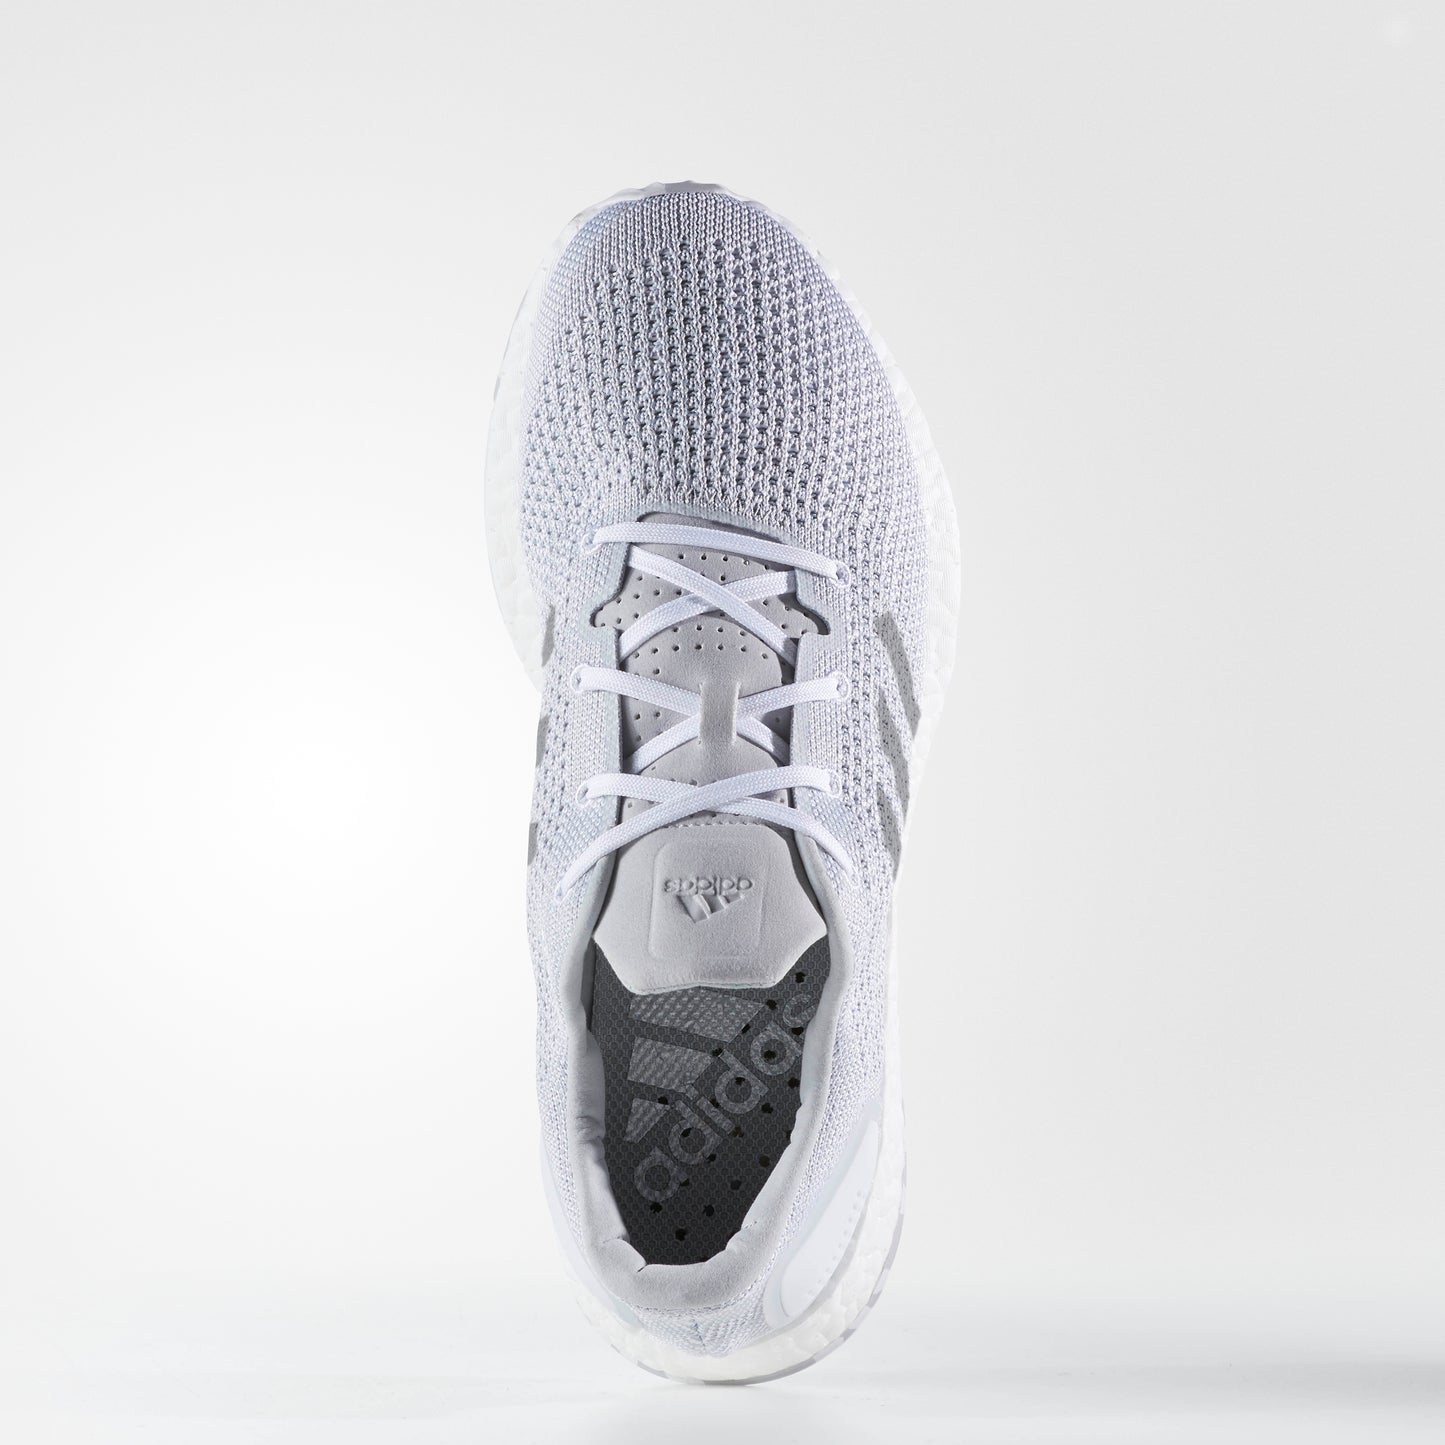 adidas PURE BOOST DPR Woven Shoes - Light Grey | Men's